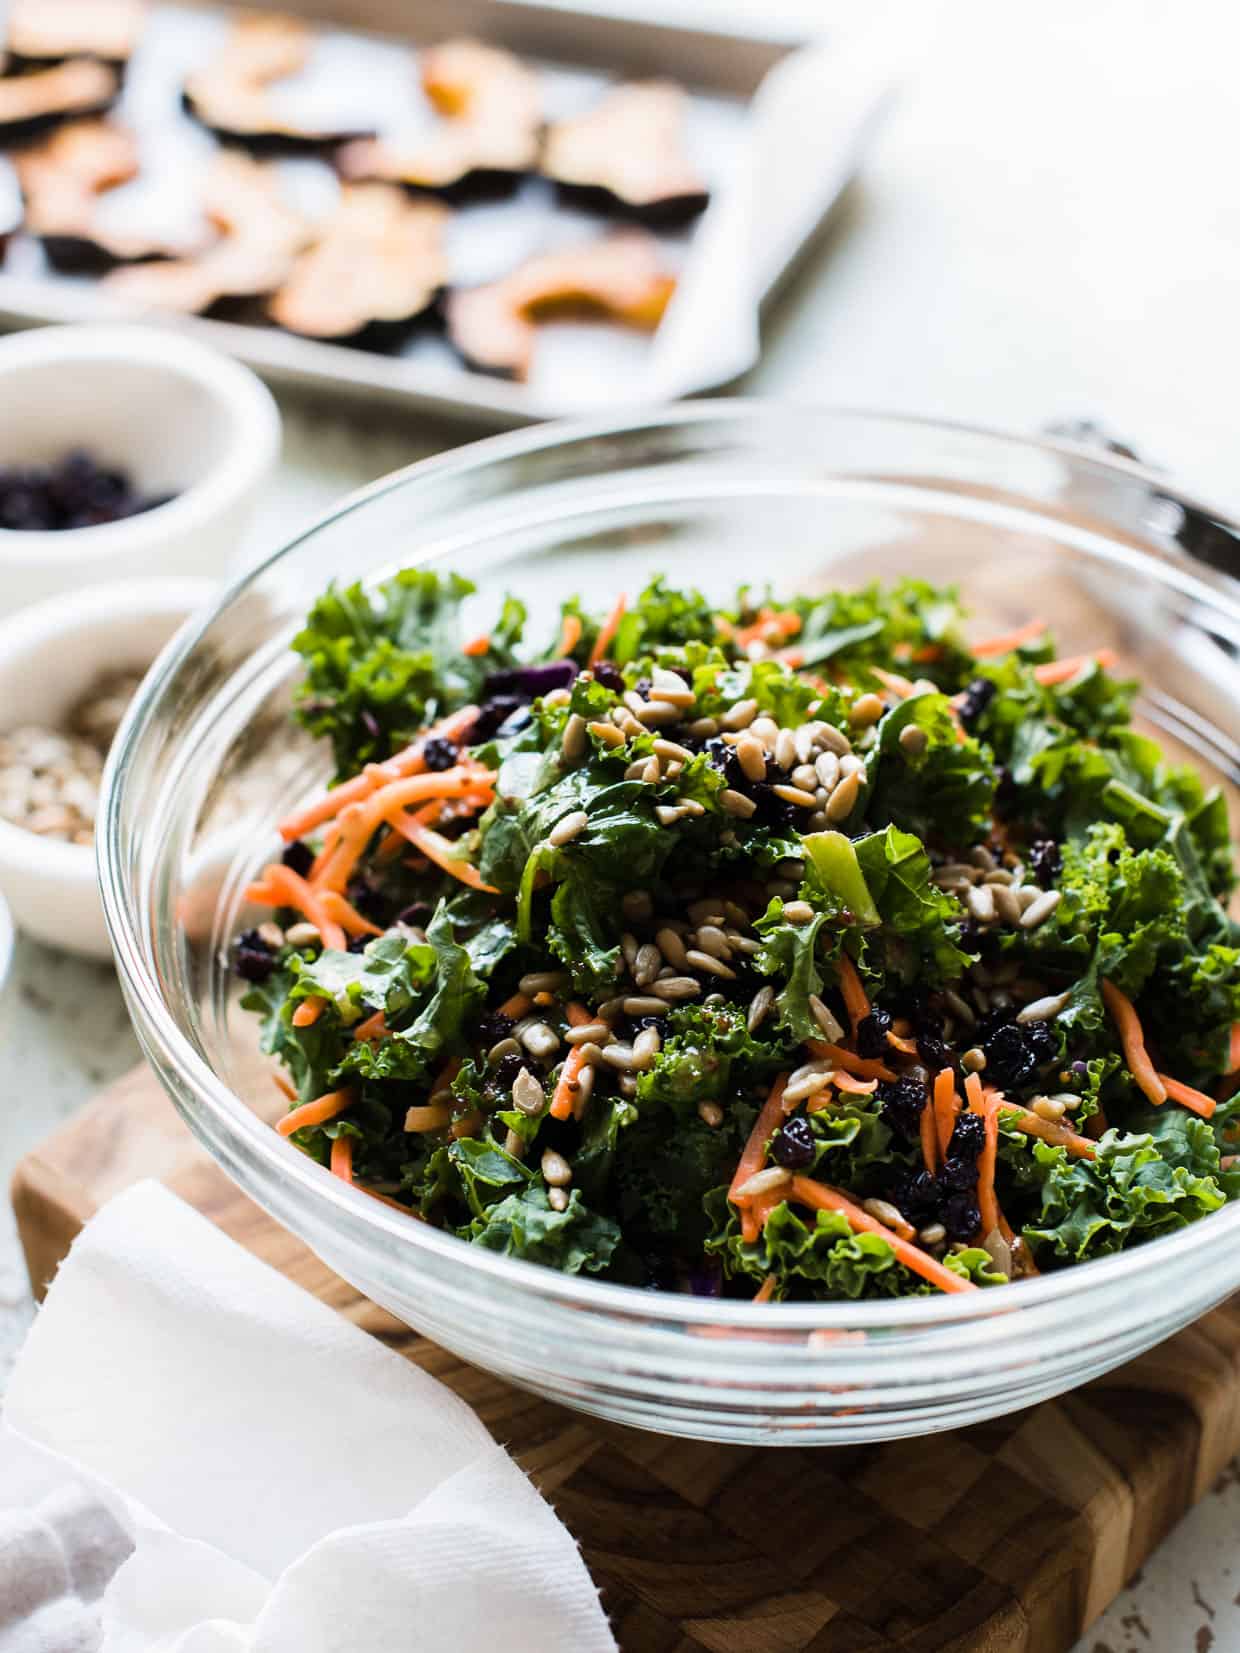 Kale salad with carrots, currants, and sunflower seeds in a glass bowl for Roasted Acorn Squash and Kale Salad.